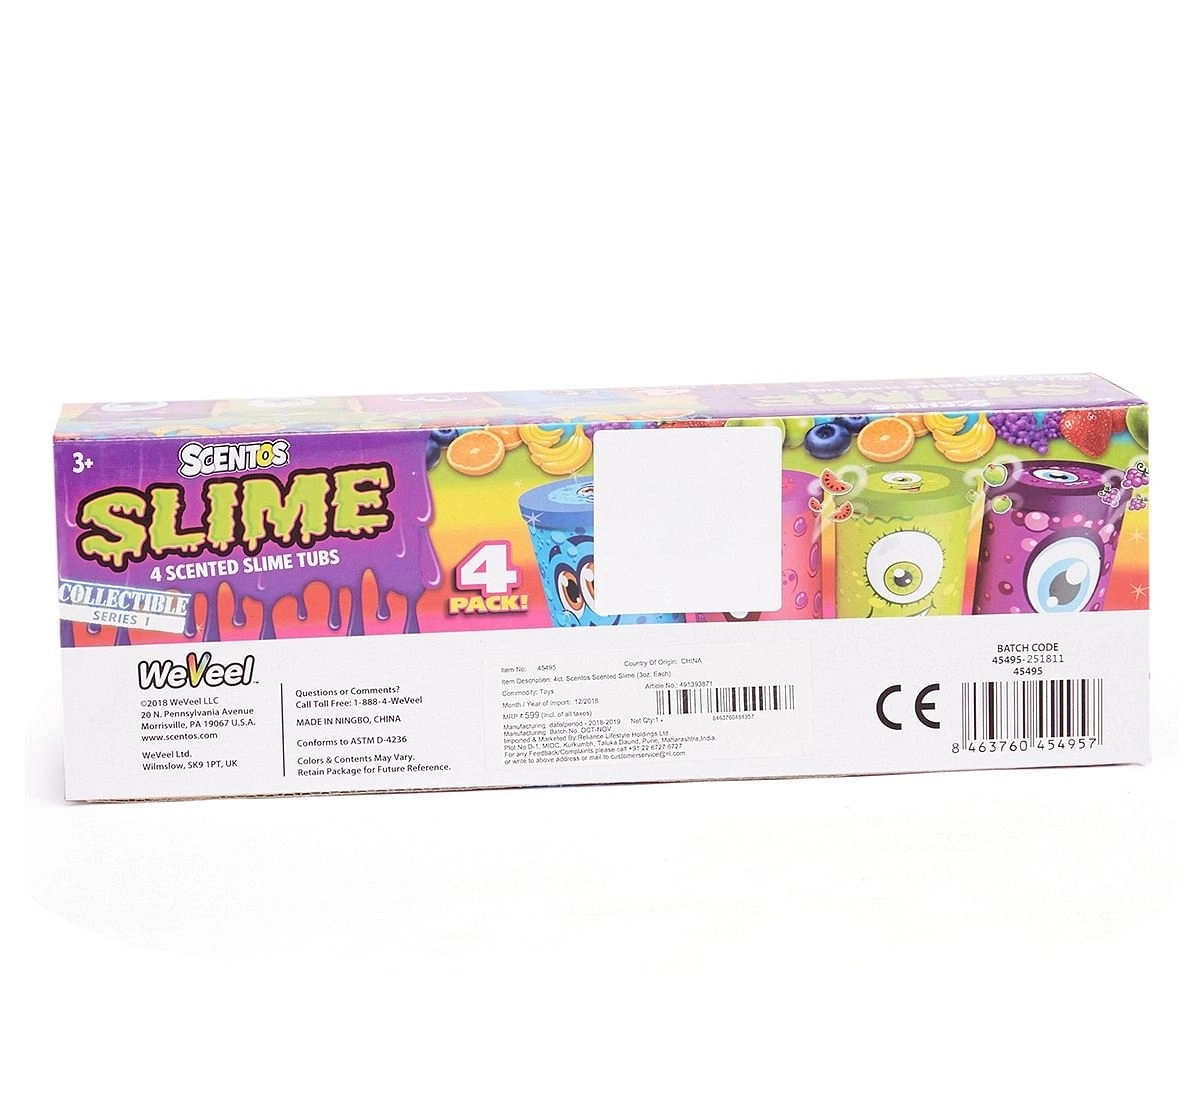 Scentos Scented Slime 3Oz Each  Science Kits for Kids age 3Y+ 